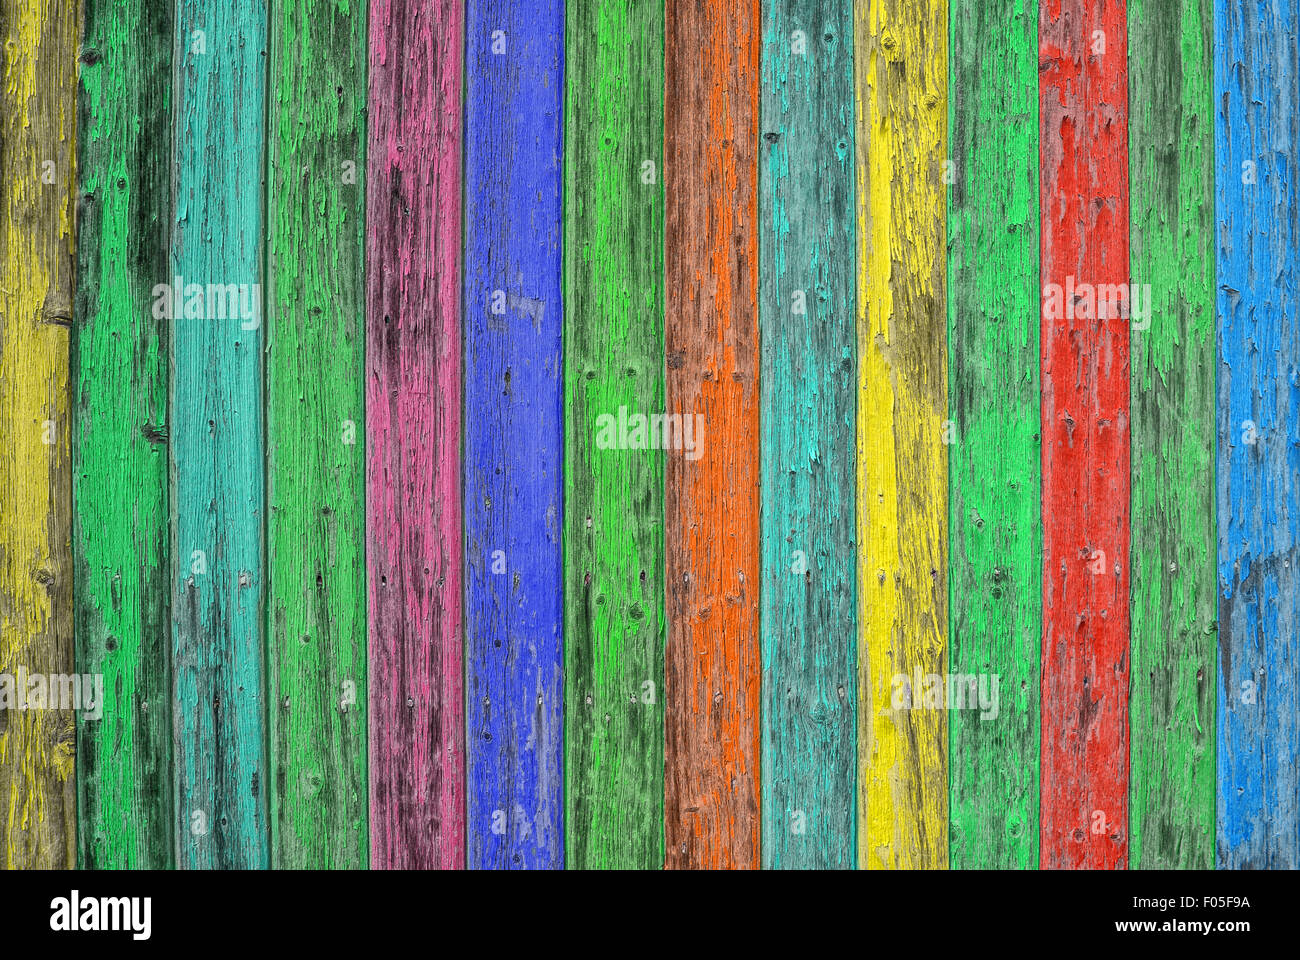 Colorful wooden tiles. Colored wood background. Blue green yellow red shabby chic wallpaper texture Stock Photo